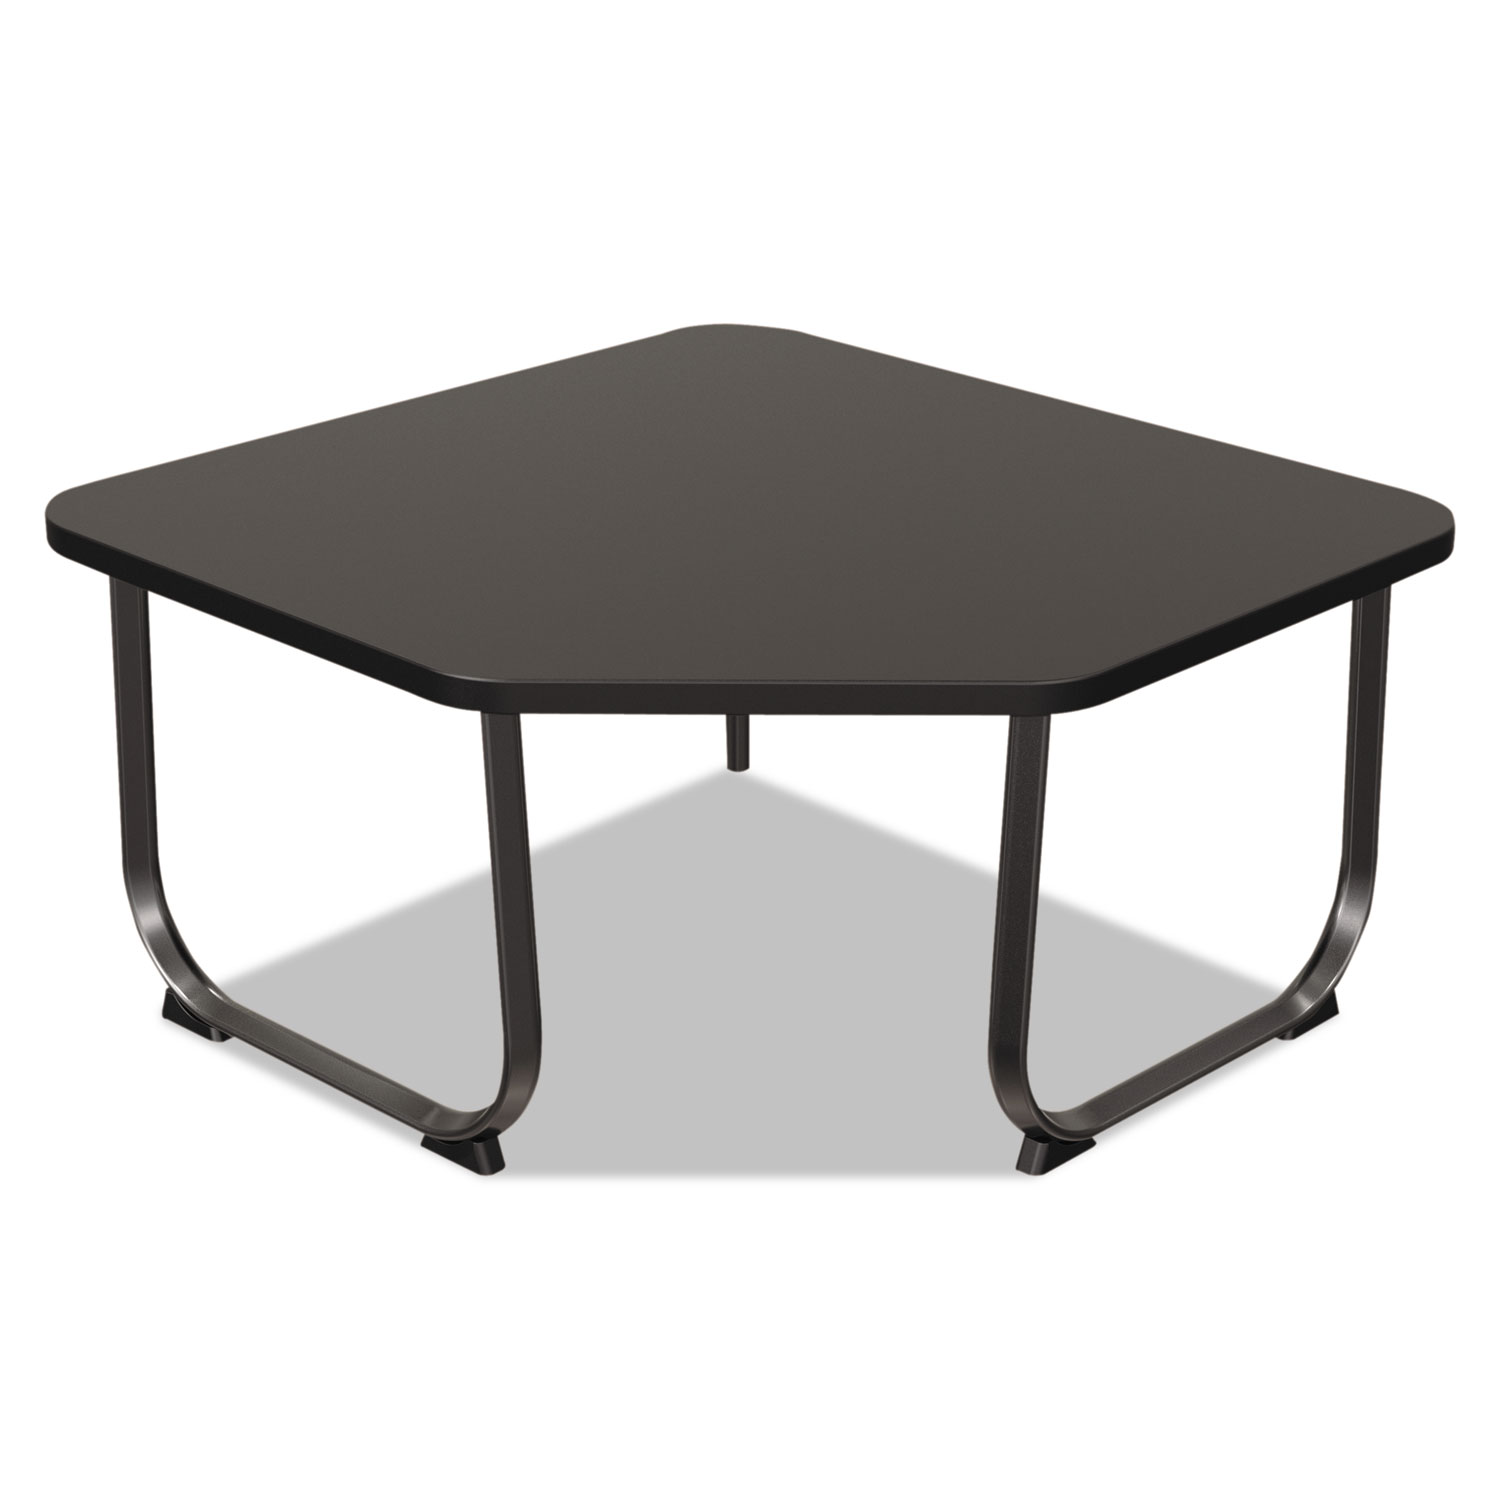 Oui Reception and Lobby Tables, Corner Table, 31w x 31d x 19h, Black